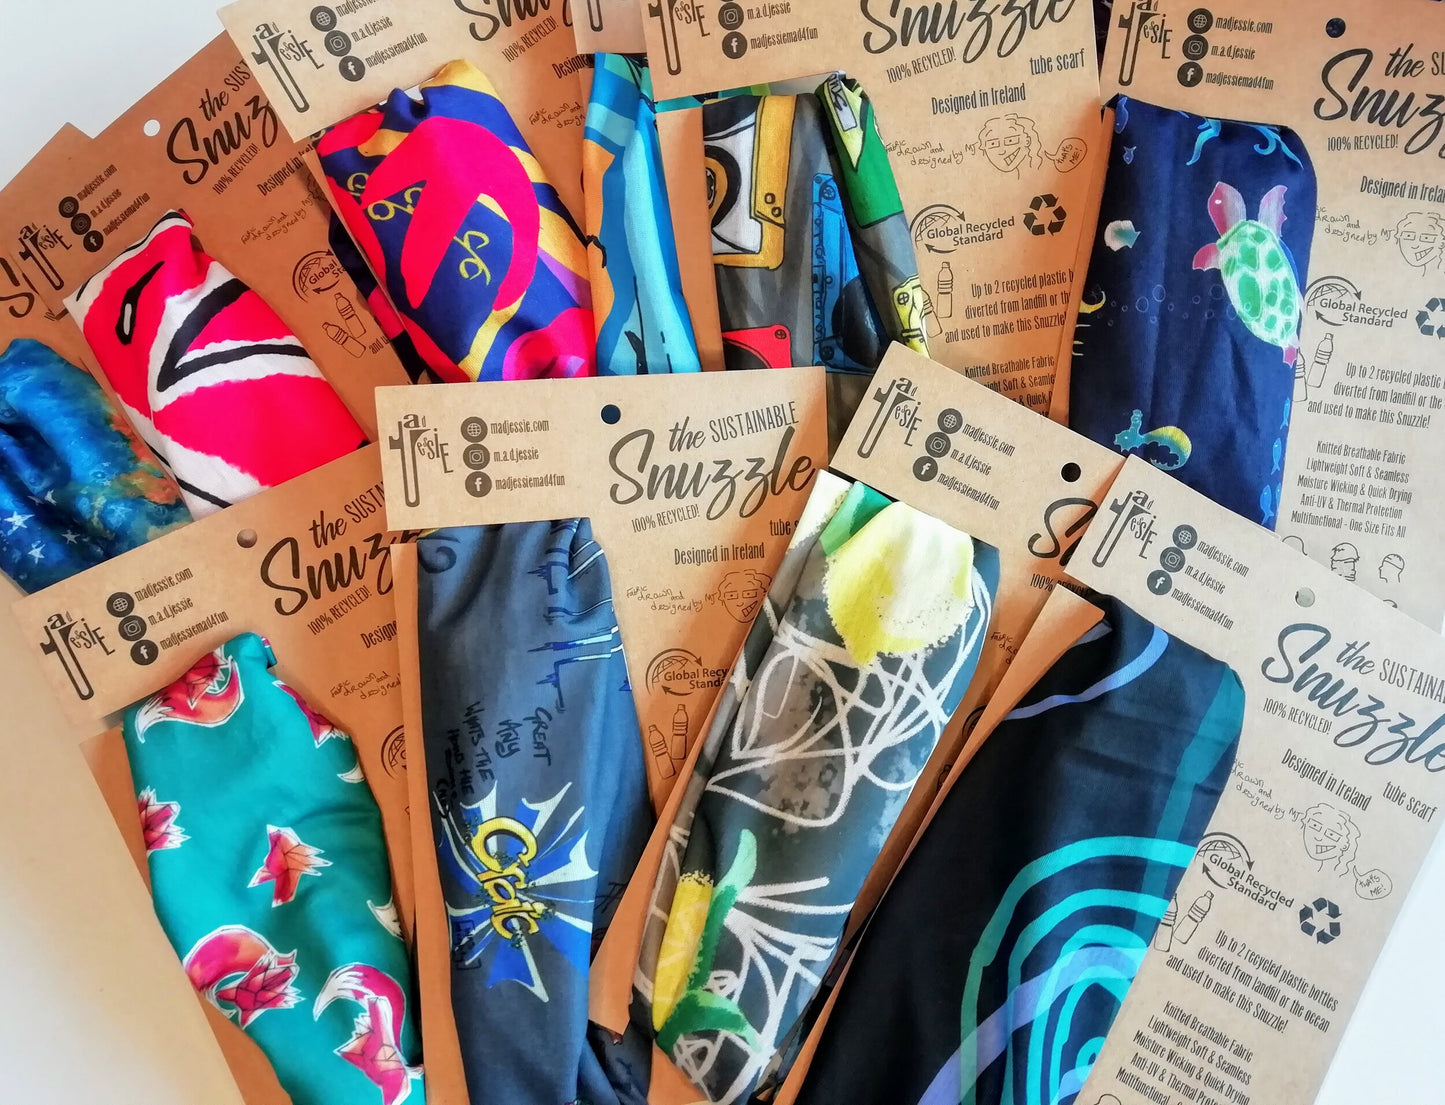 6 Month Sustainable Snuzzle Subscription - (5 + 1 FREE!)